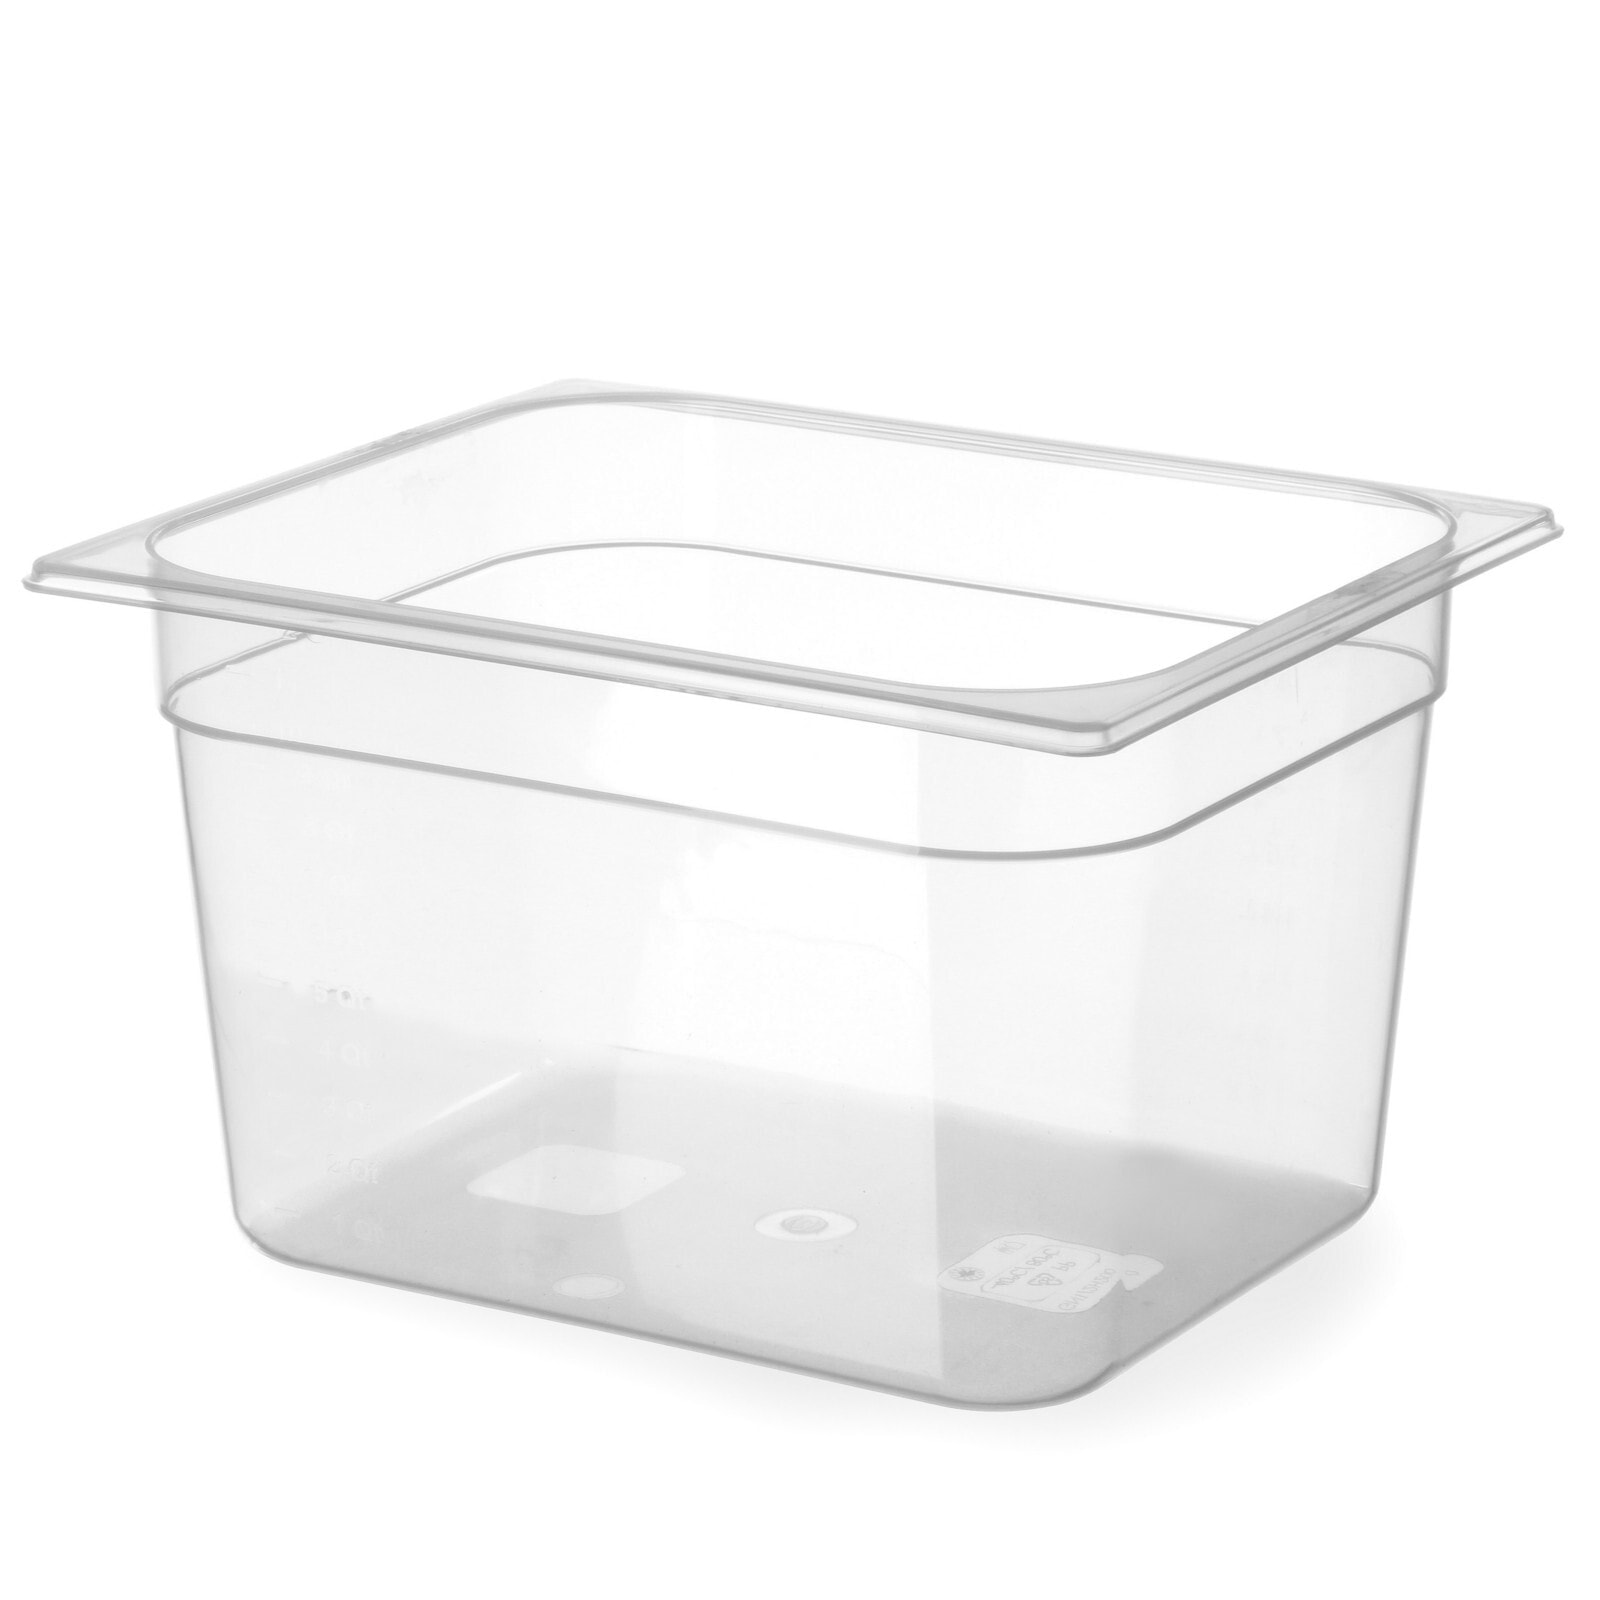 Gastronomy container made of polypropylene GN 1/2, height 150 mm - Hendi 880111